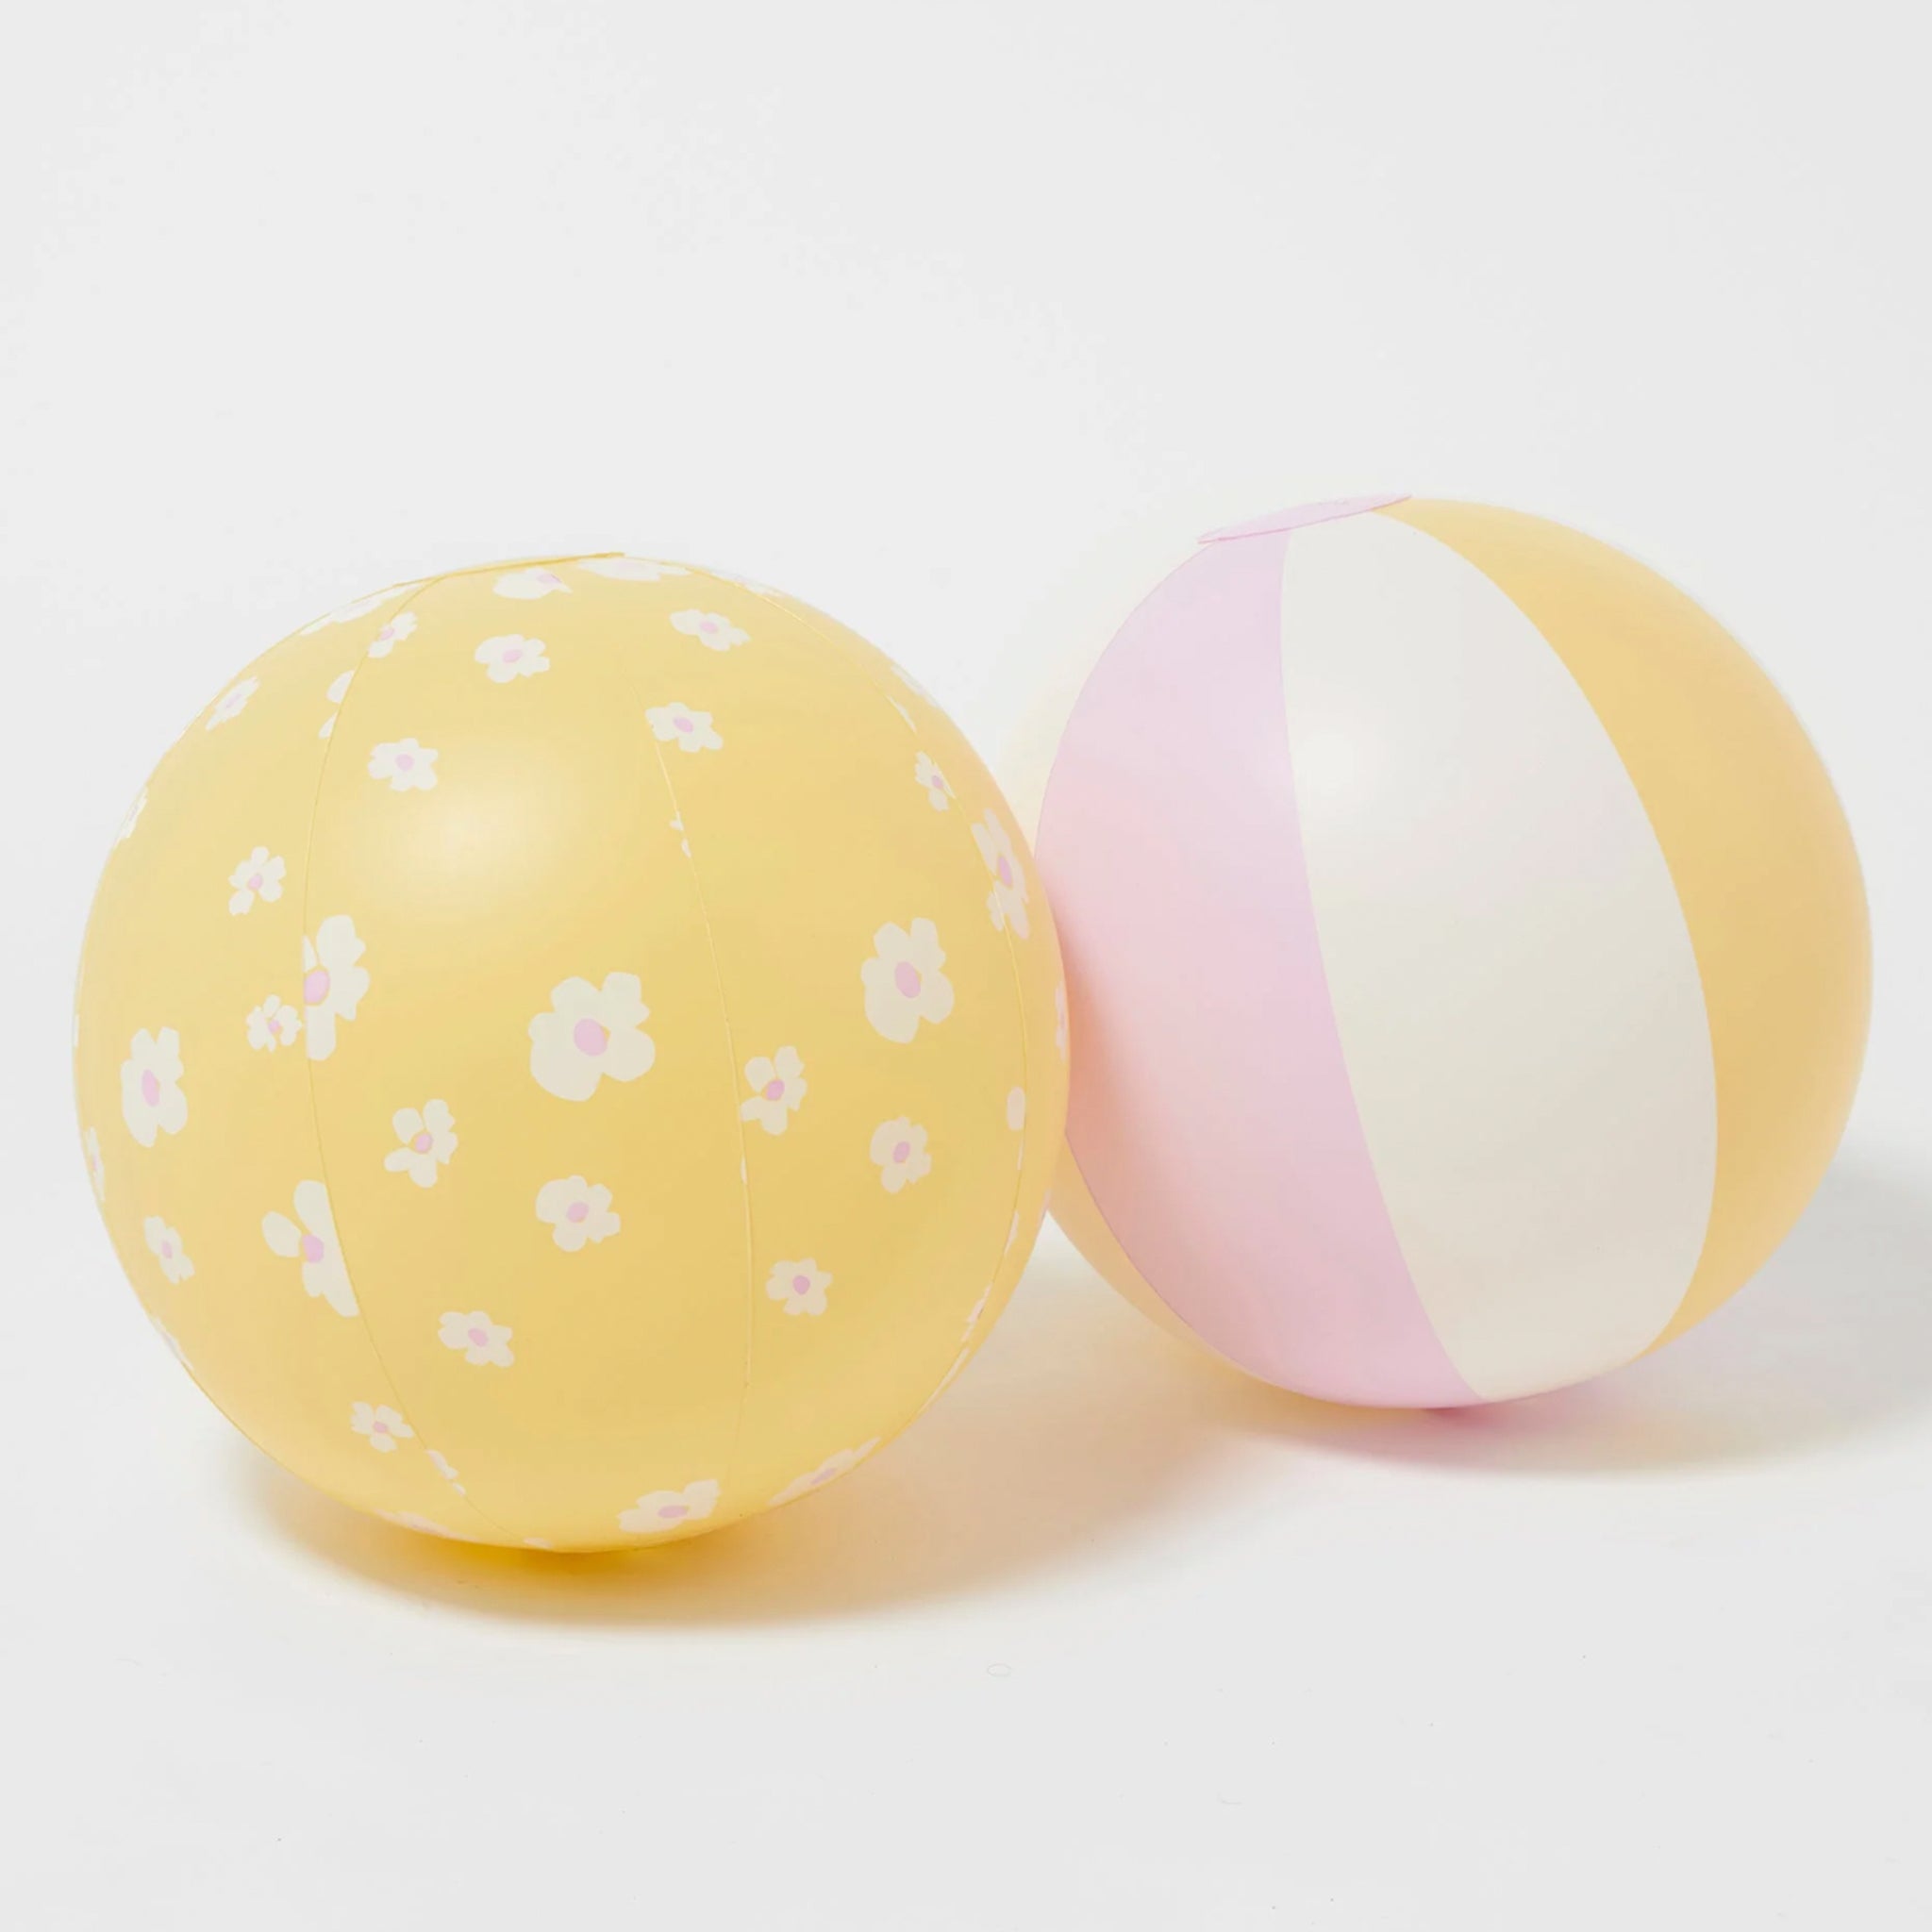 Two inflatable beach balls, one yellow floral printed and the other pink, yellow and white stripes.